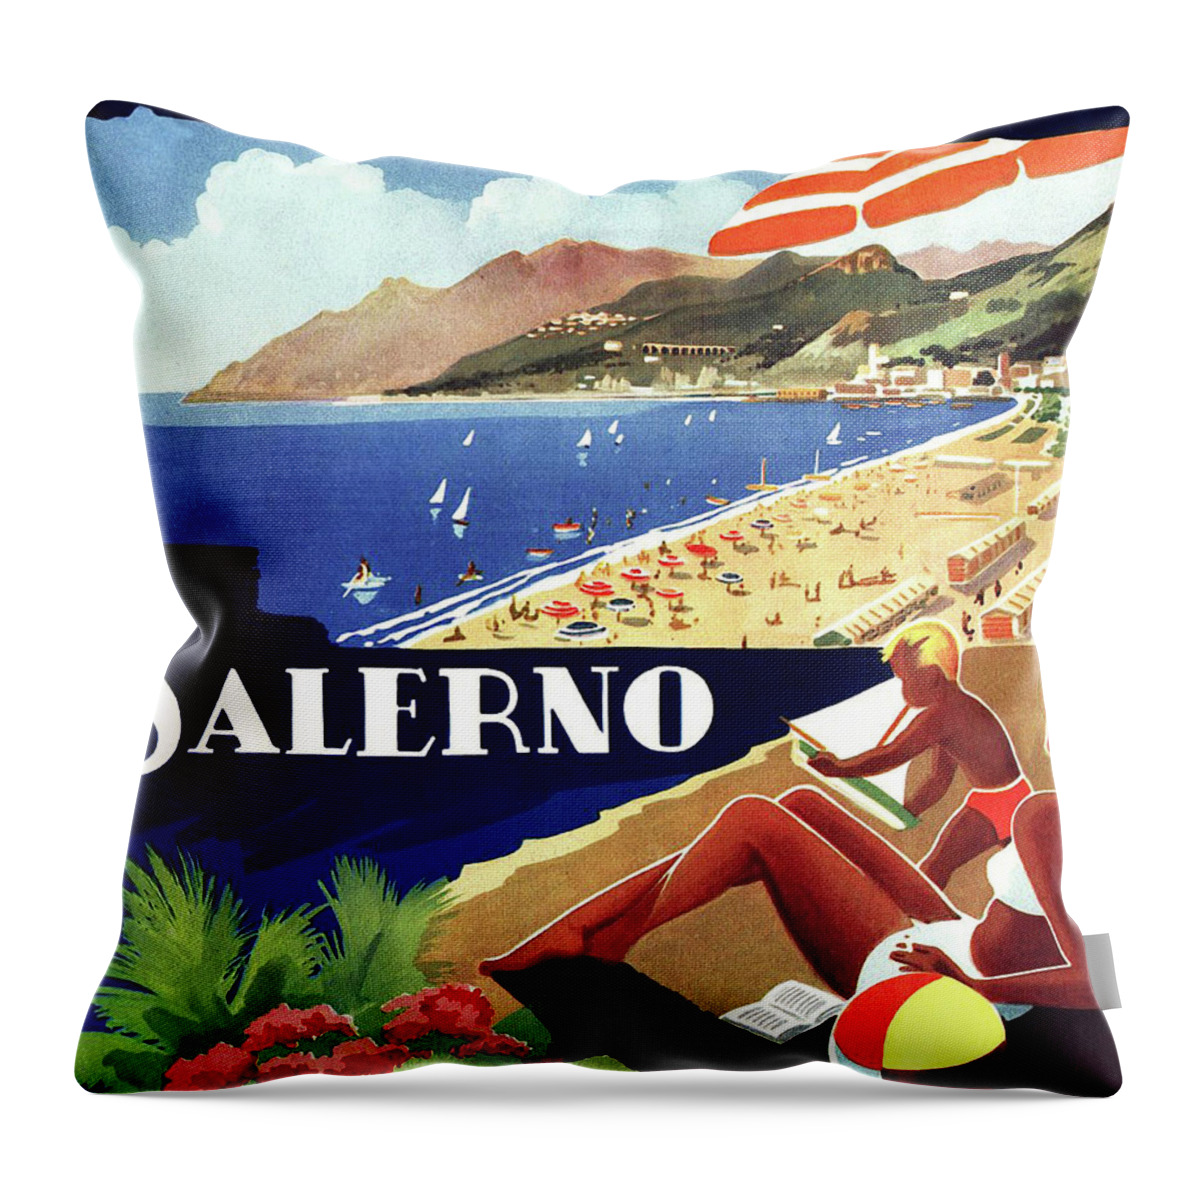 Salerno Throw Pillow featuring the painting Salerno beach, Italy, vintage travel poster by Long Shot